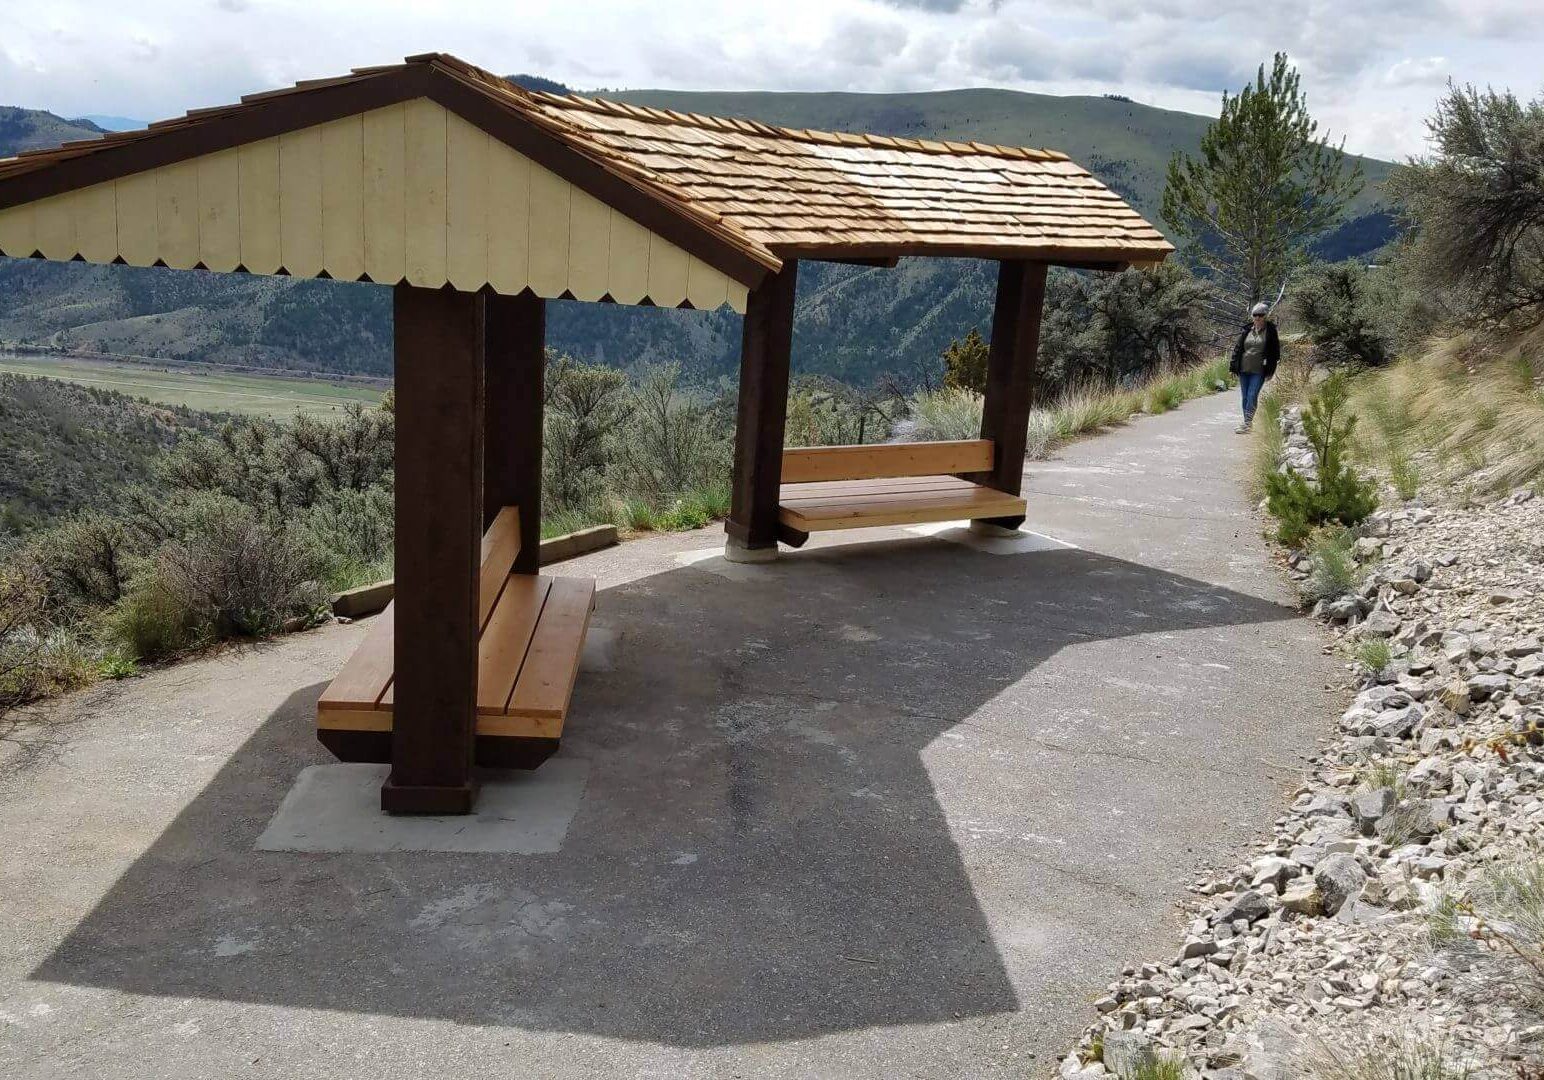 Shelter at Lewis and Clark Caverns State Park